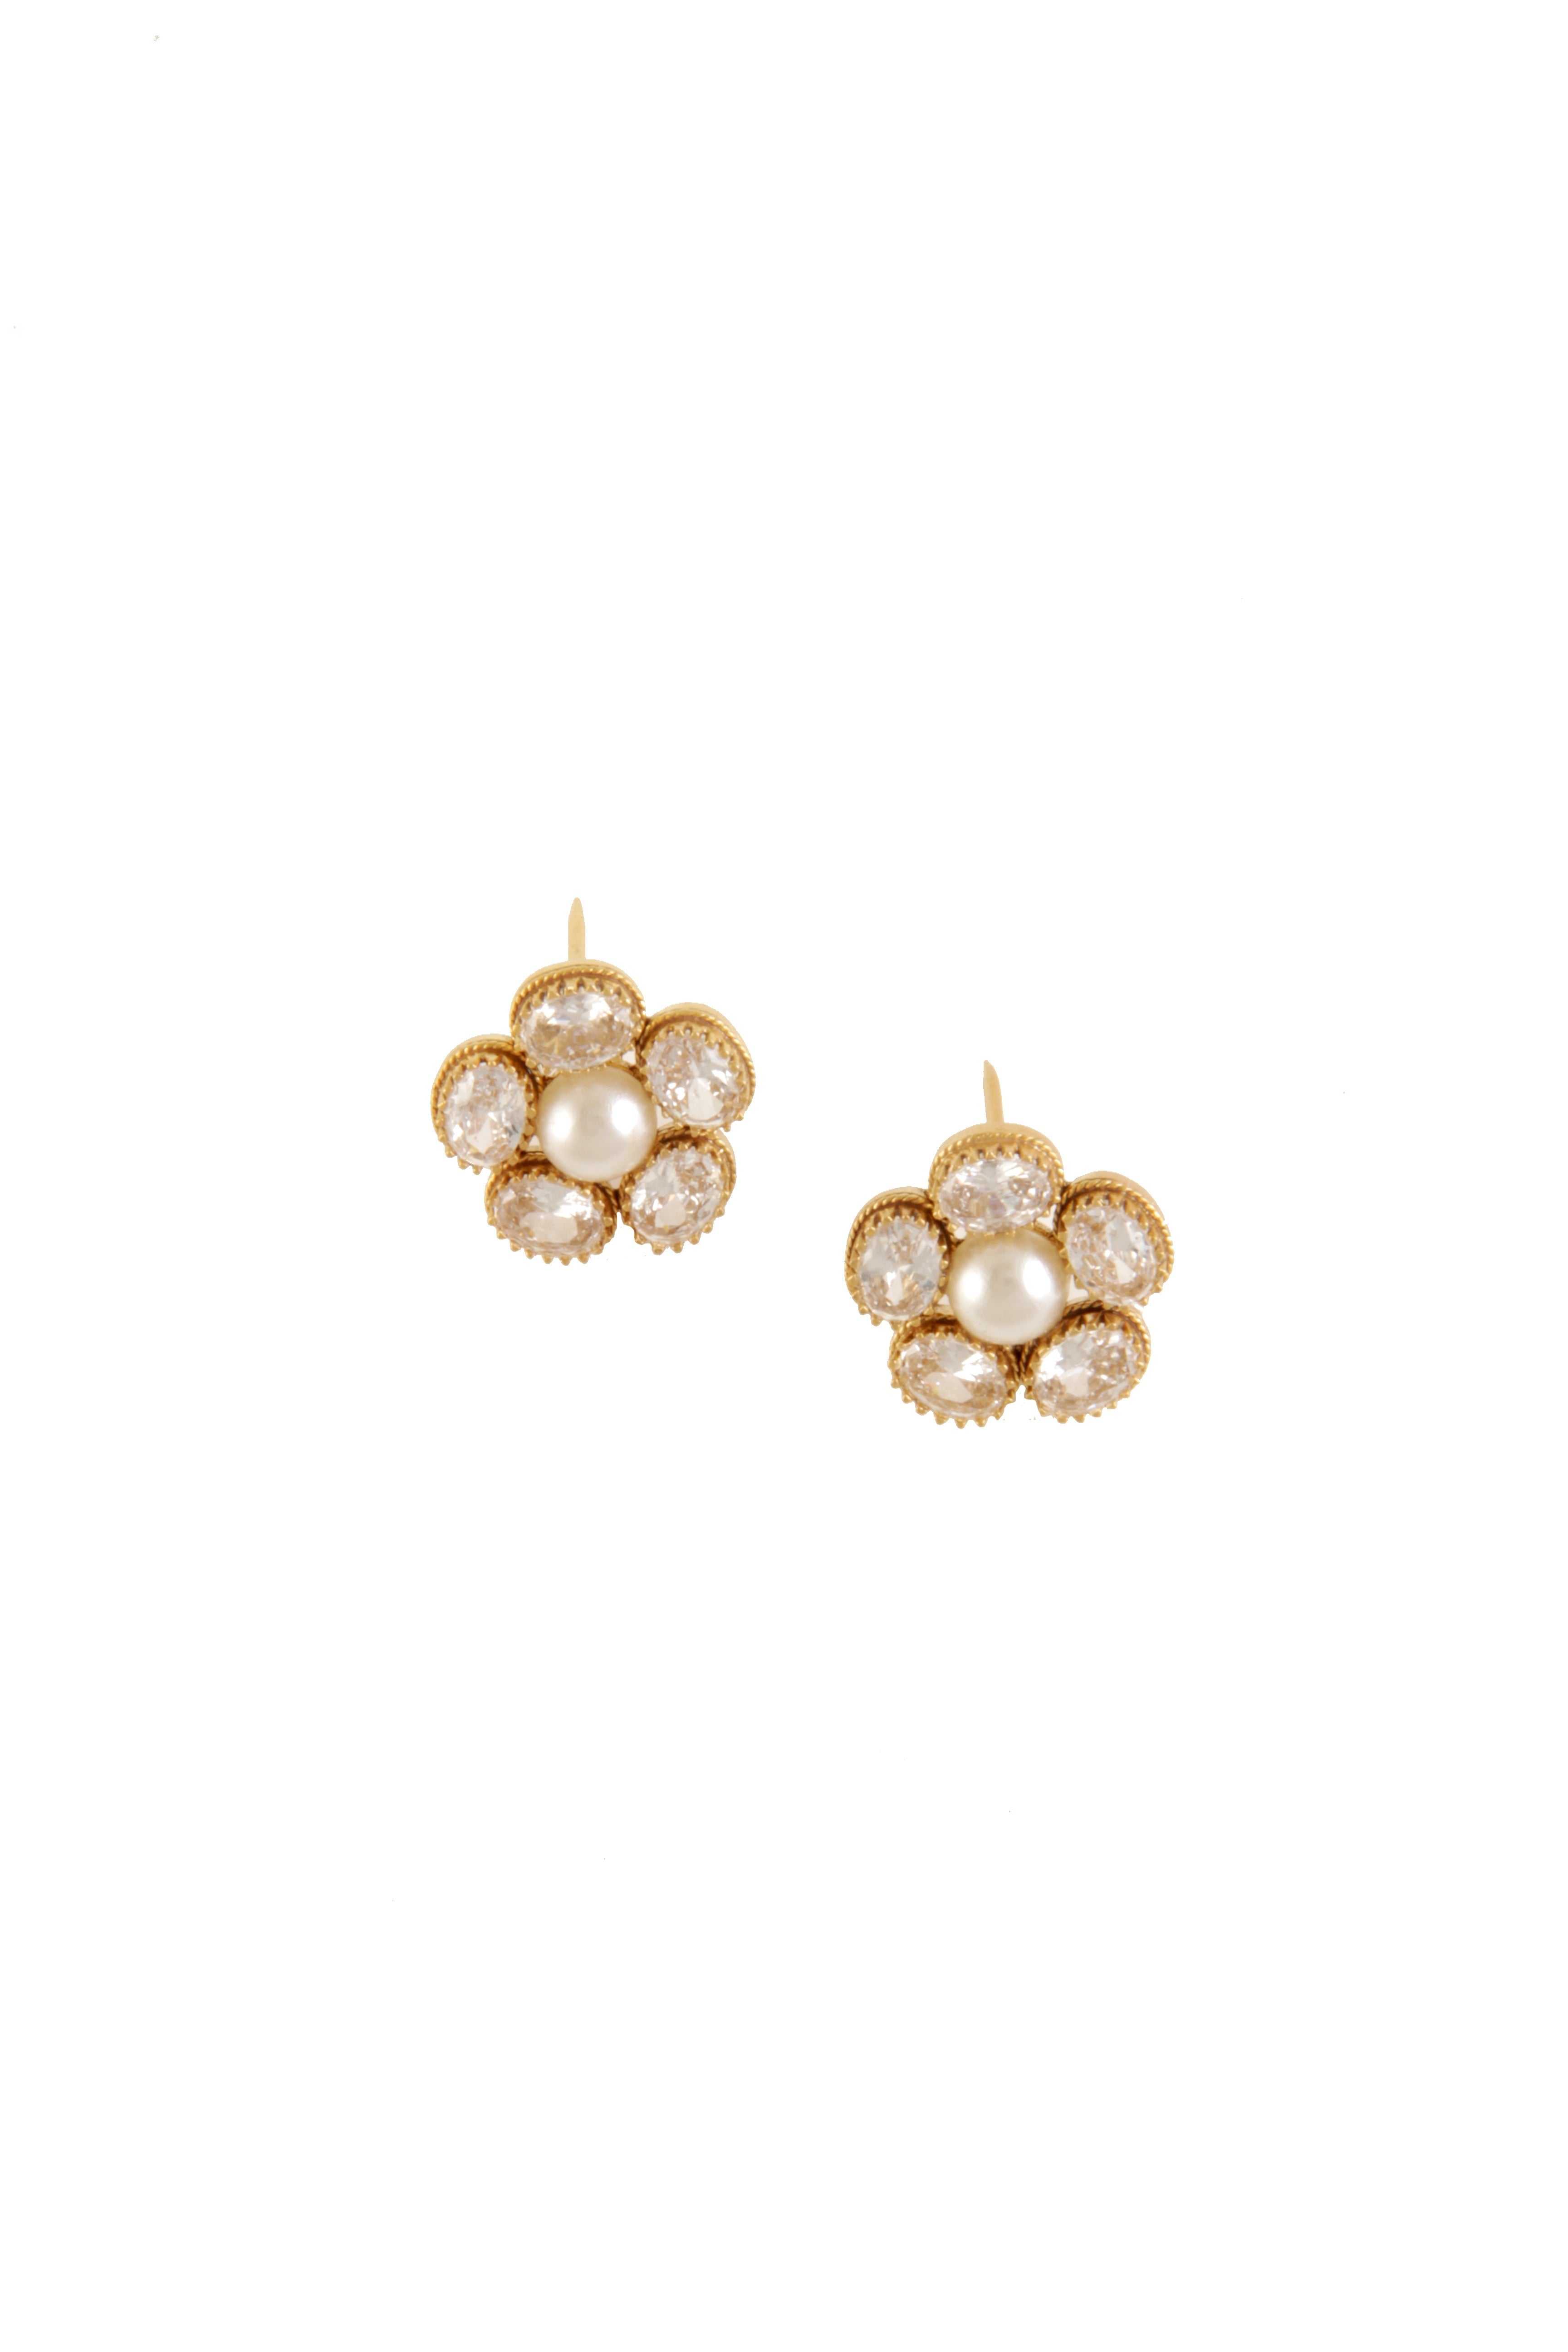 Amama,Gold Plated 5 Uncut Crystal Flower Pearl Earring